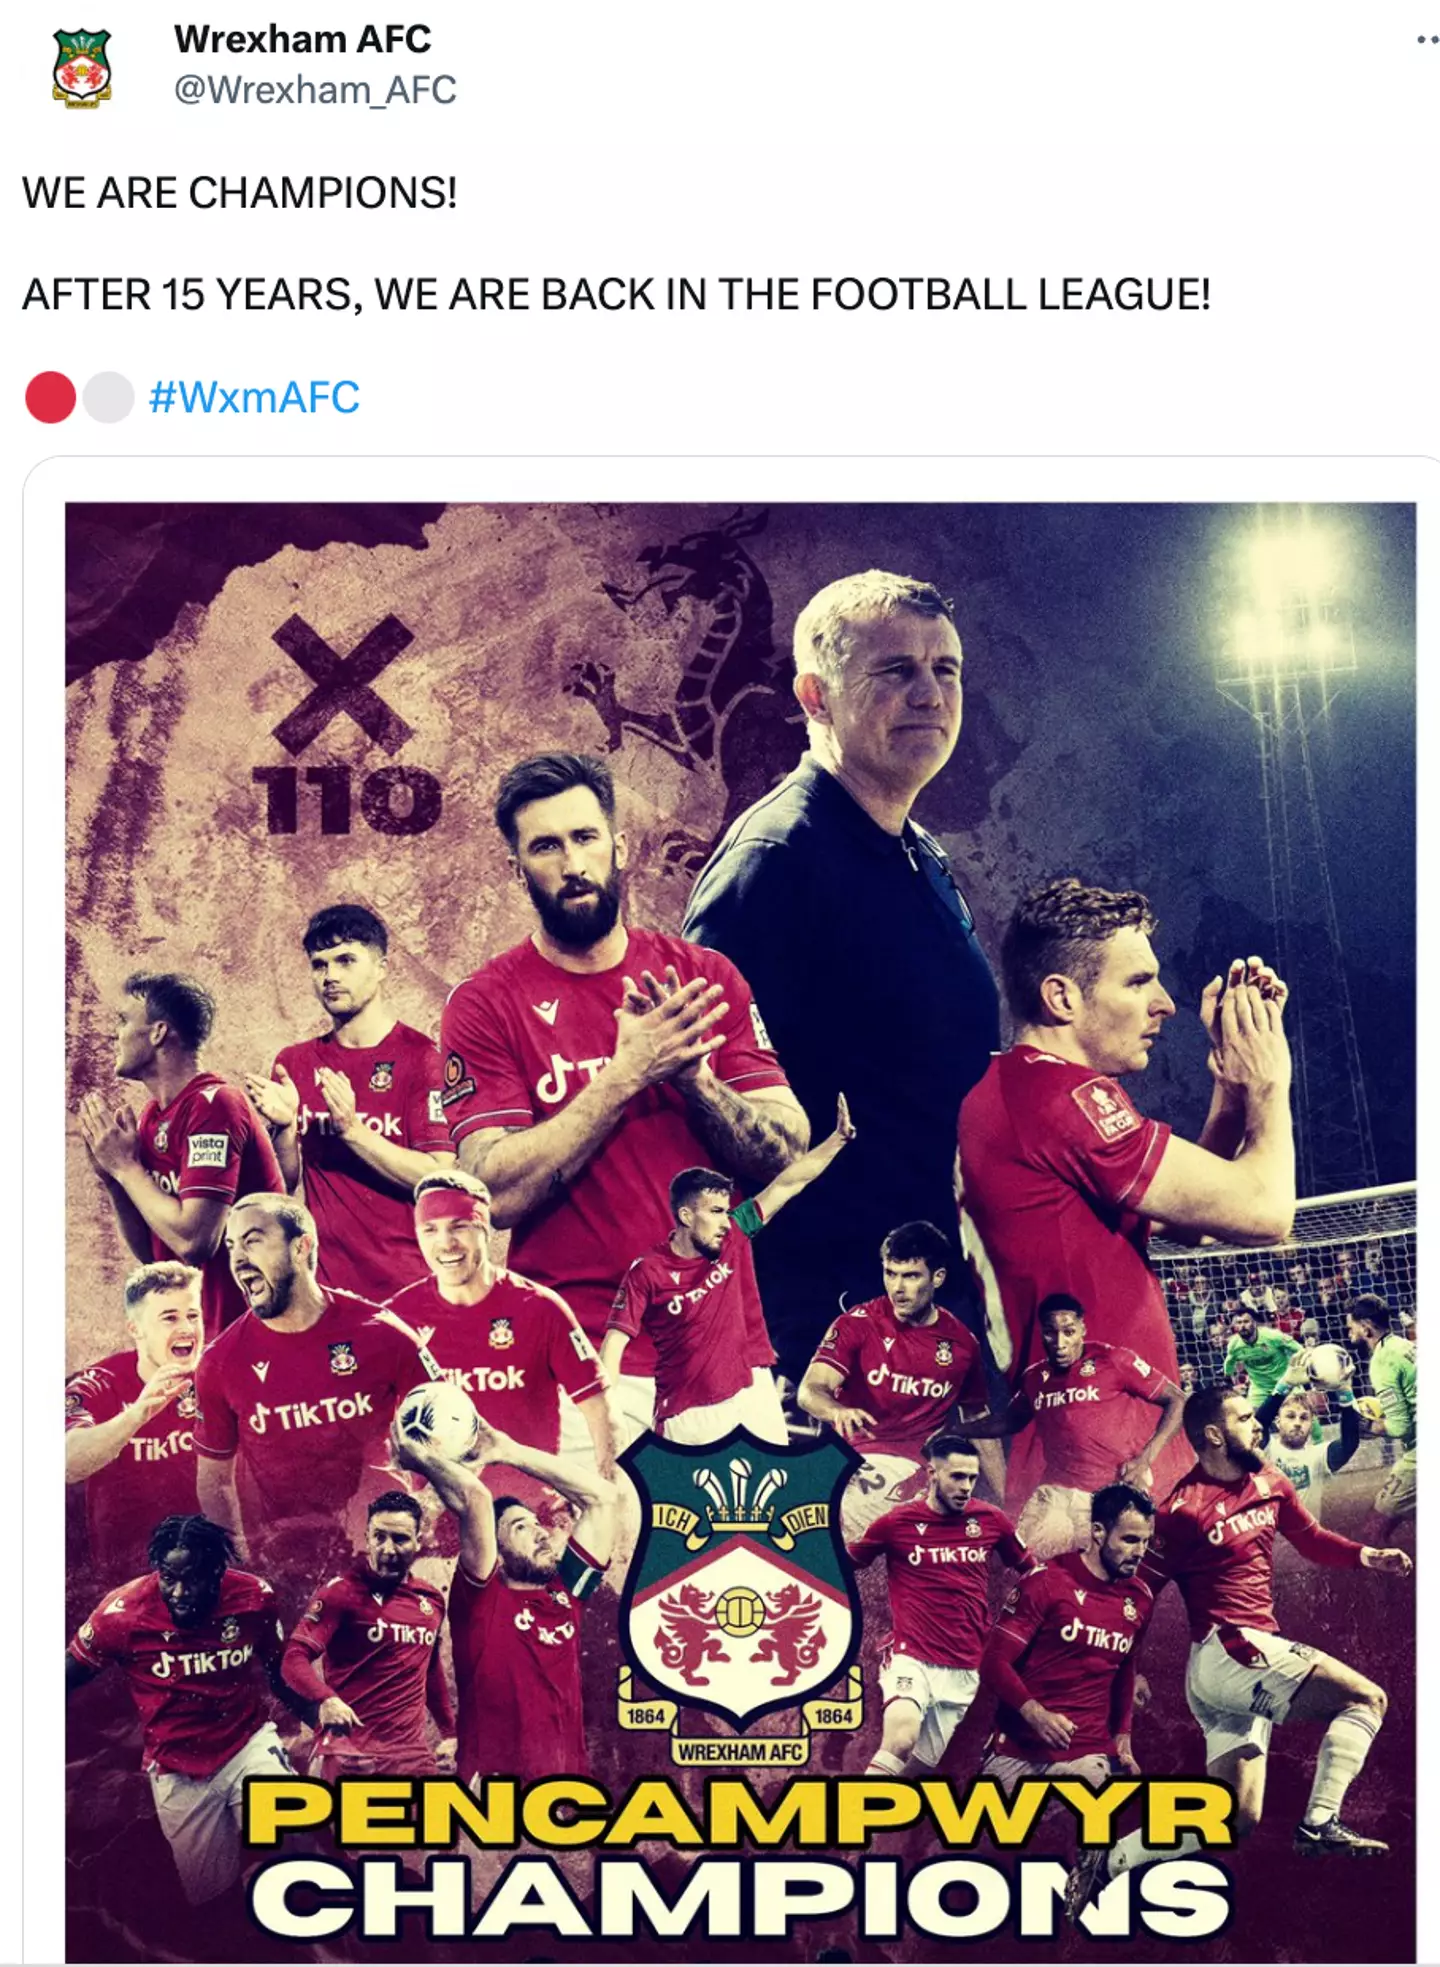 Wrexham will return to the football league after 15 years.